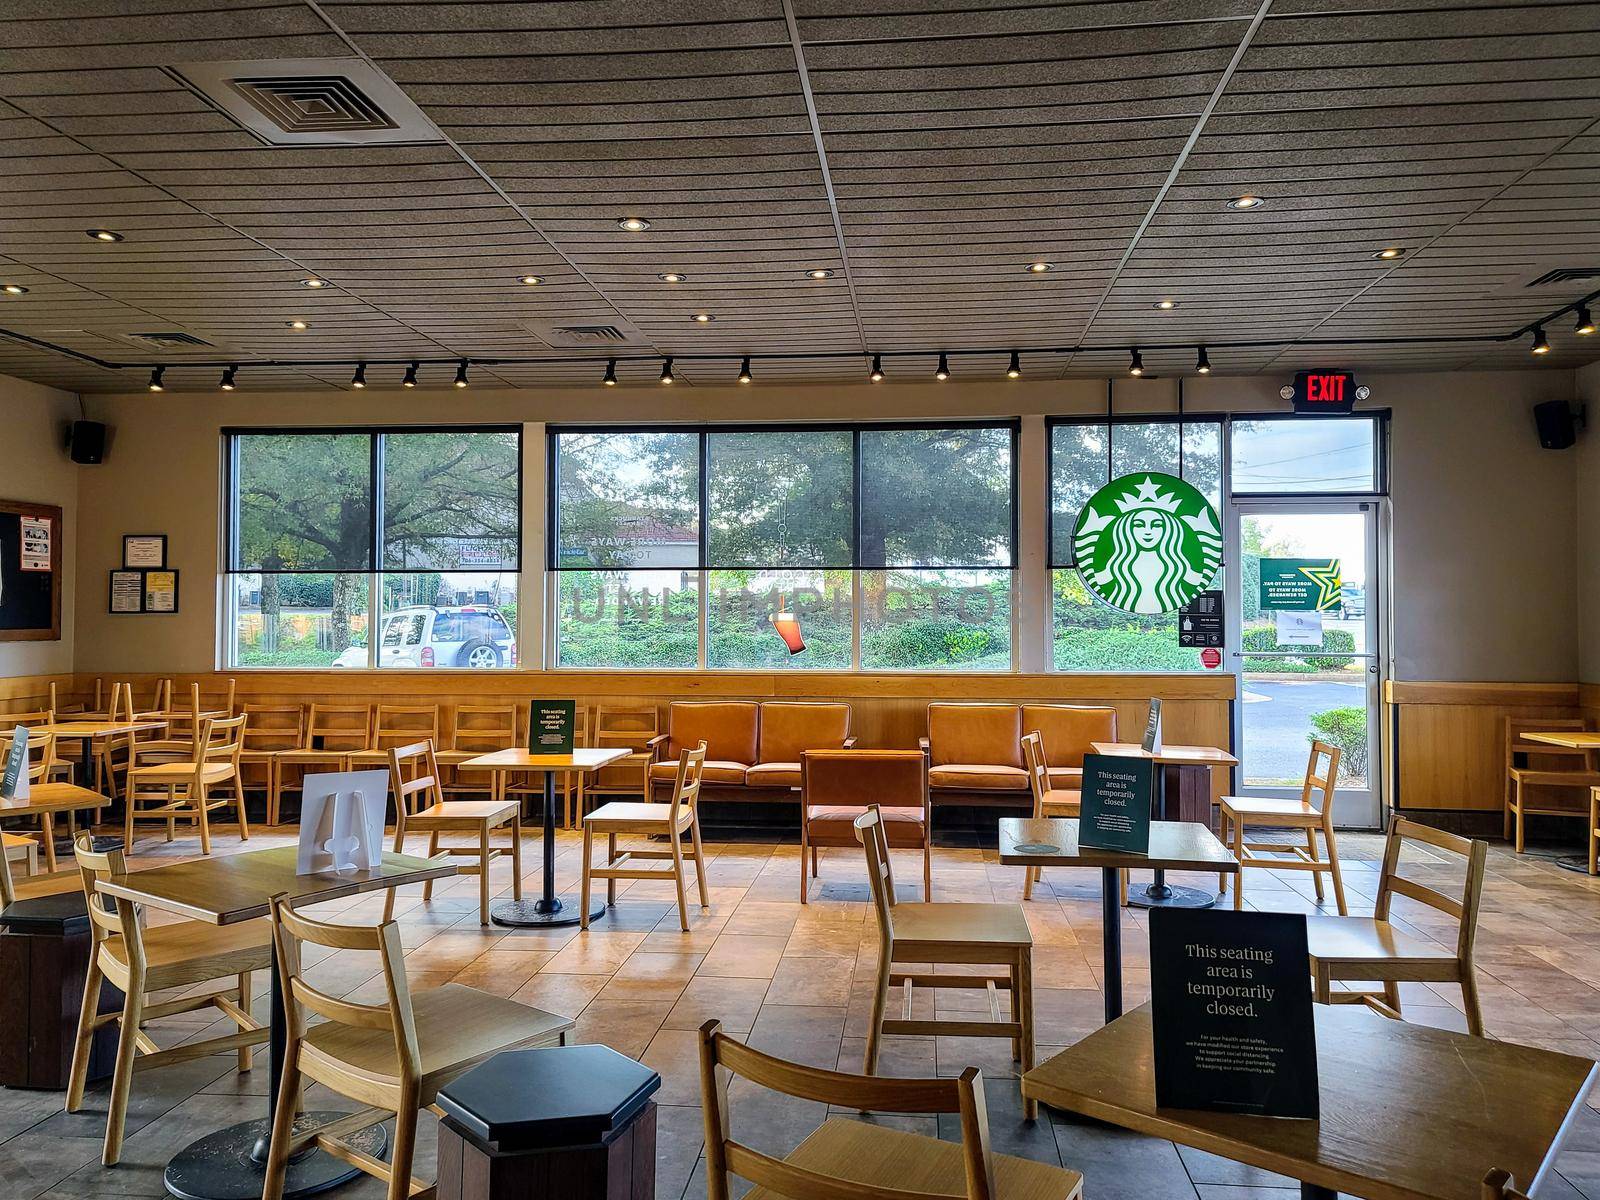 Athens, GA / the United State -  Oct 27, 2020 : Inside view and interior of Starbucks shop, Drive Thru coffee shop by Dorego